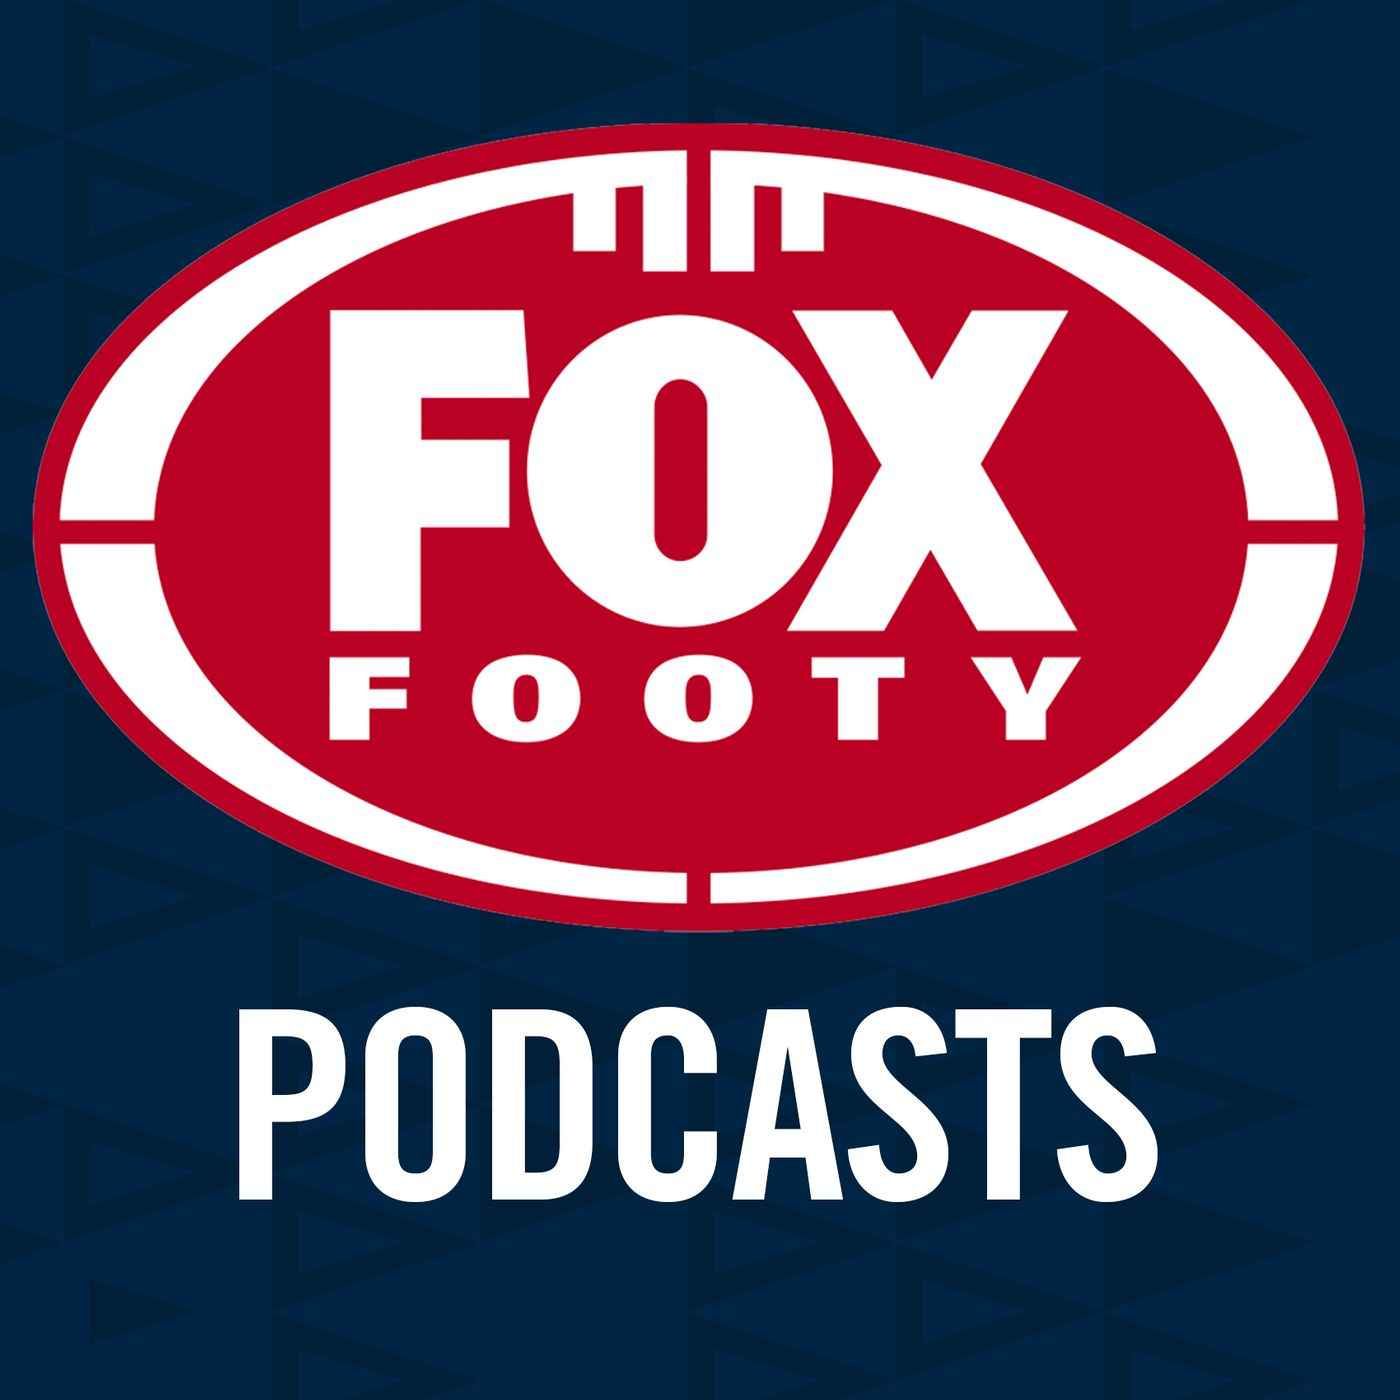 Fox Footy Podcast: Did two best teams really make GF?